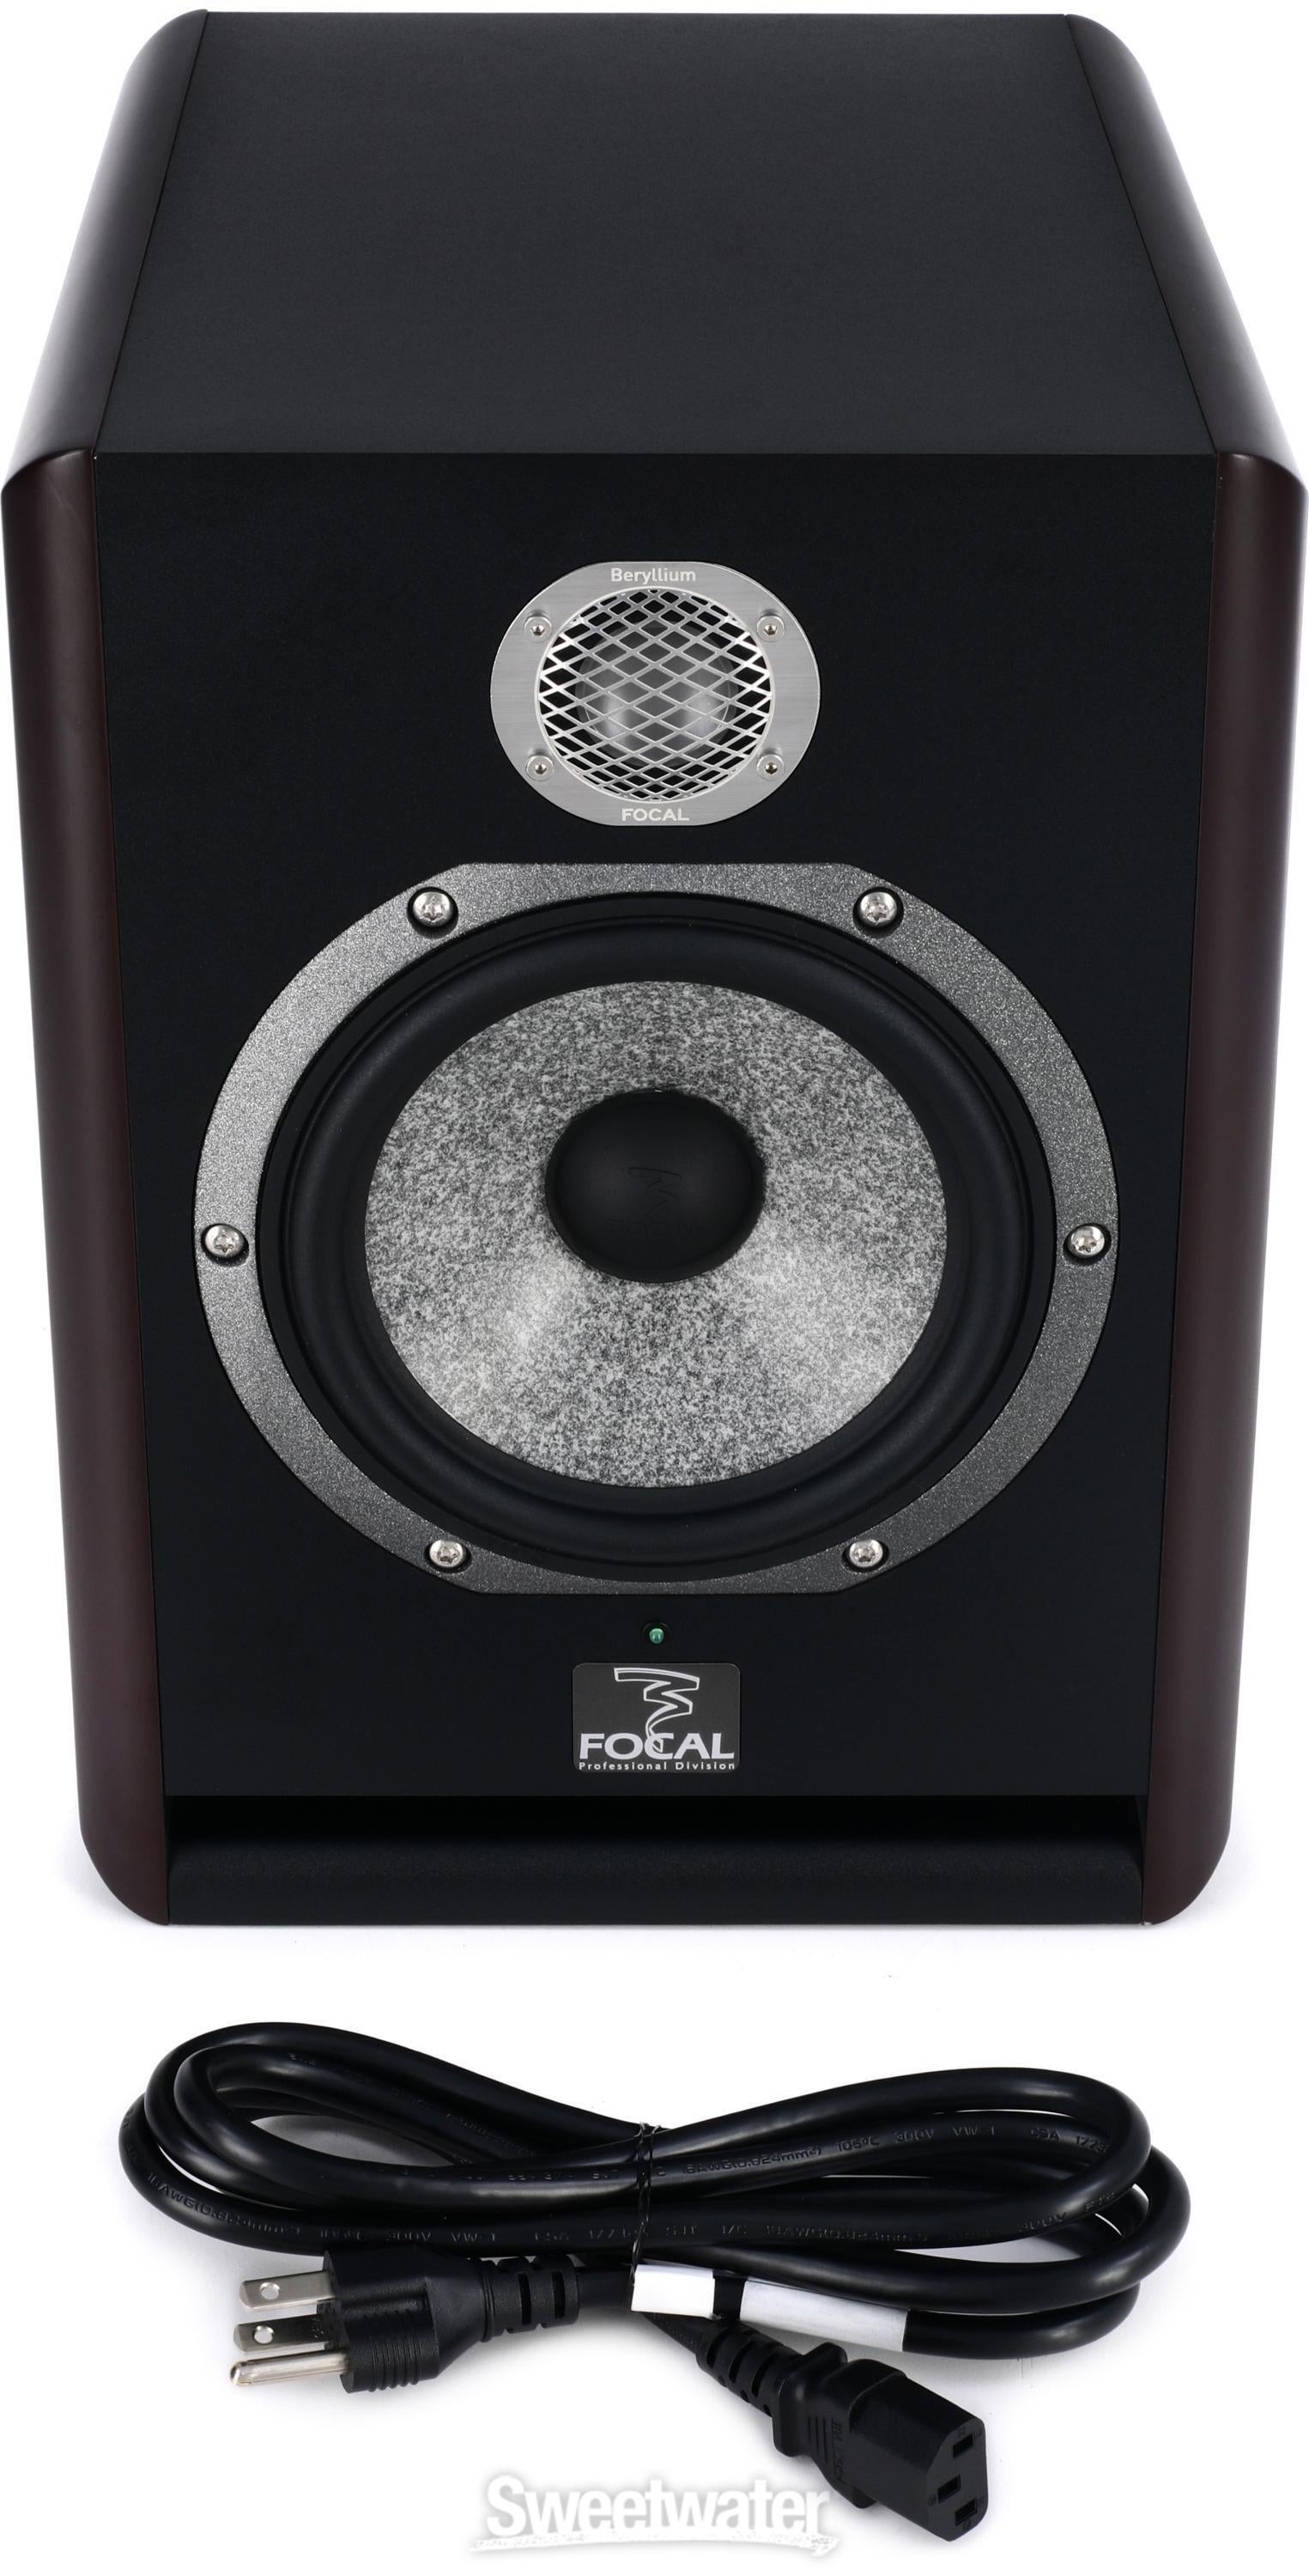 Focal Solo6 Be 6.5-inch Powered Studio Monitor Reviews | Sweetwater